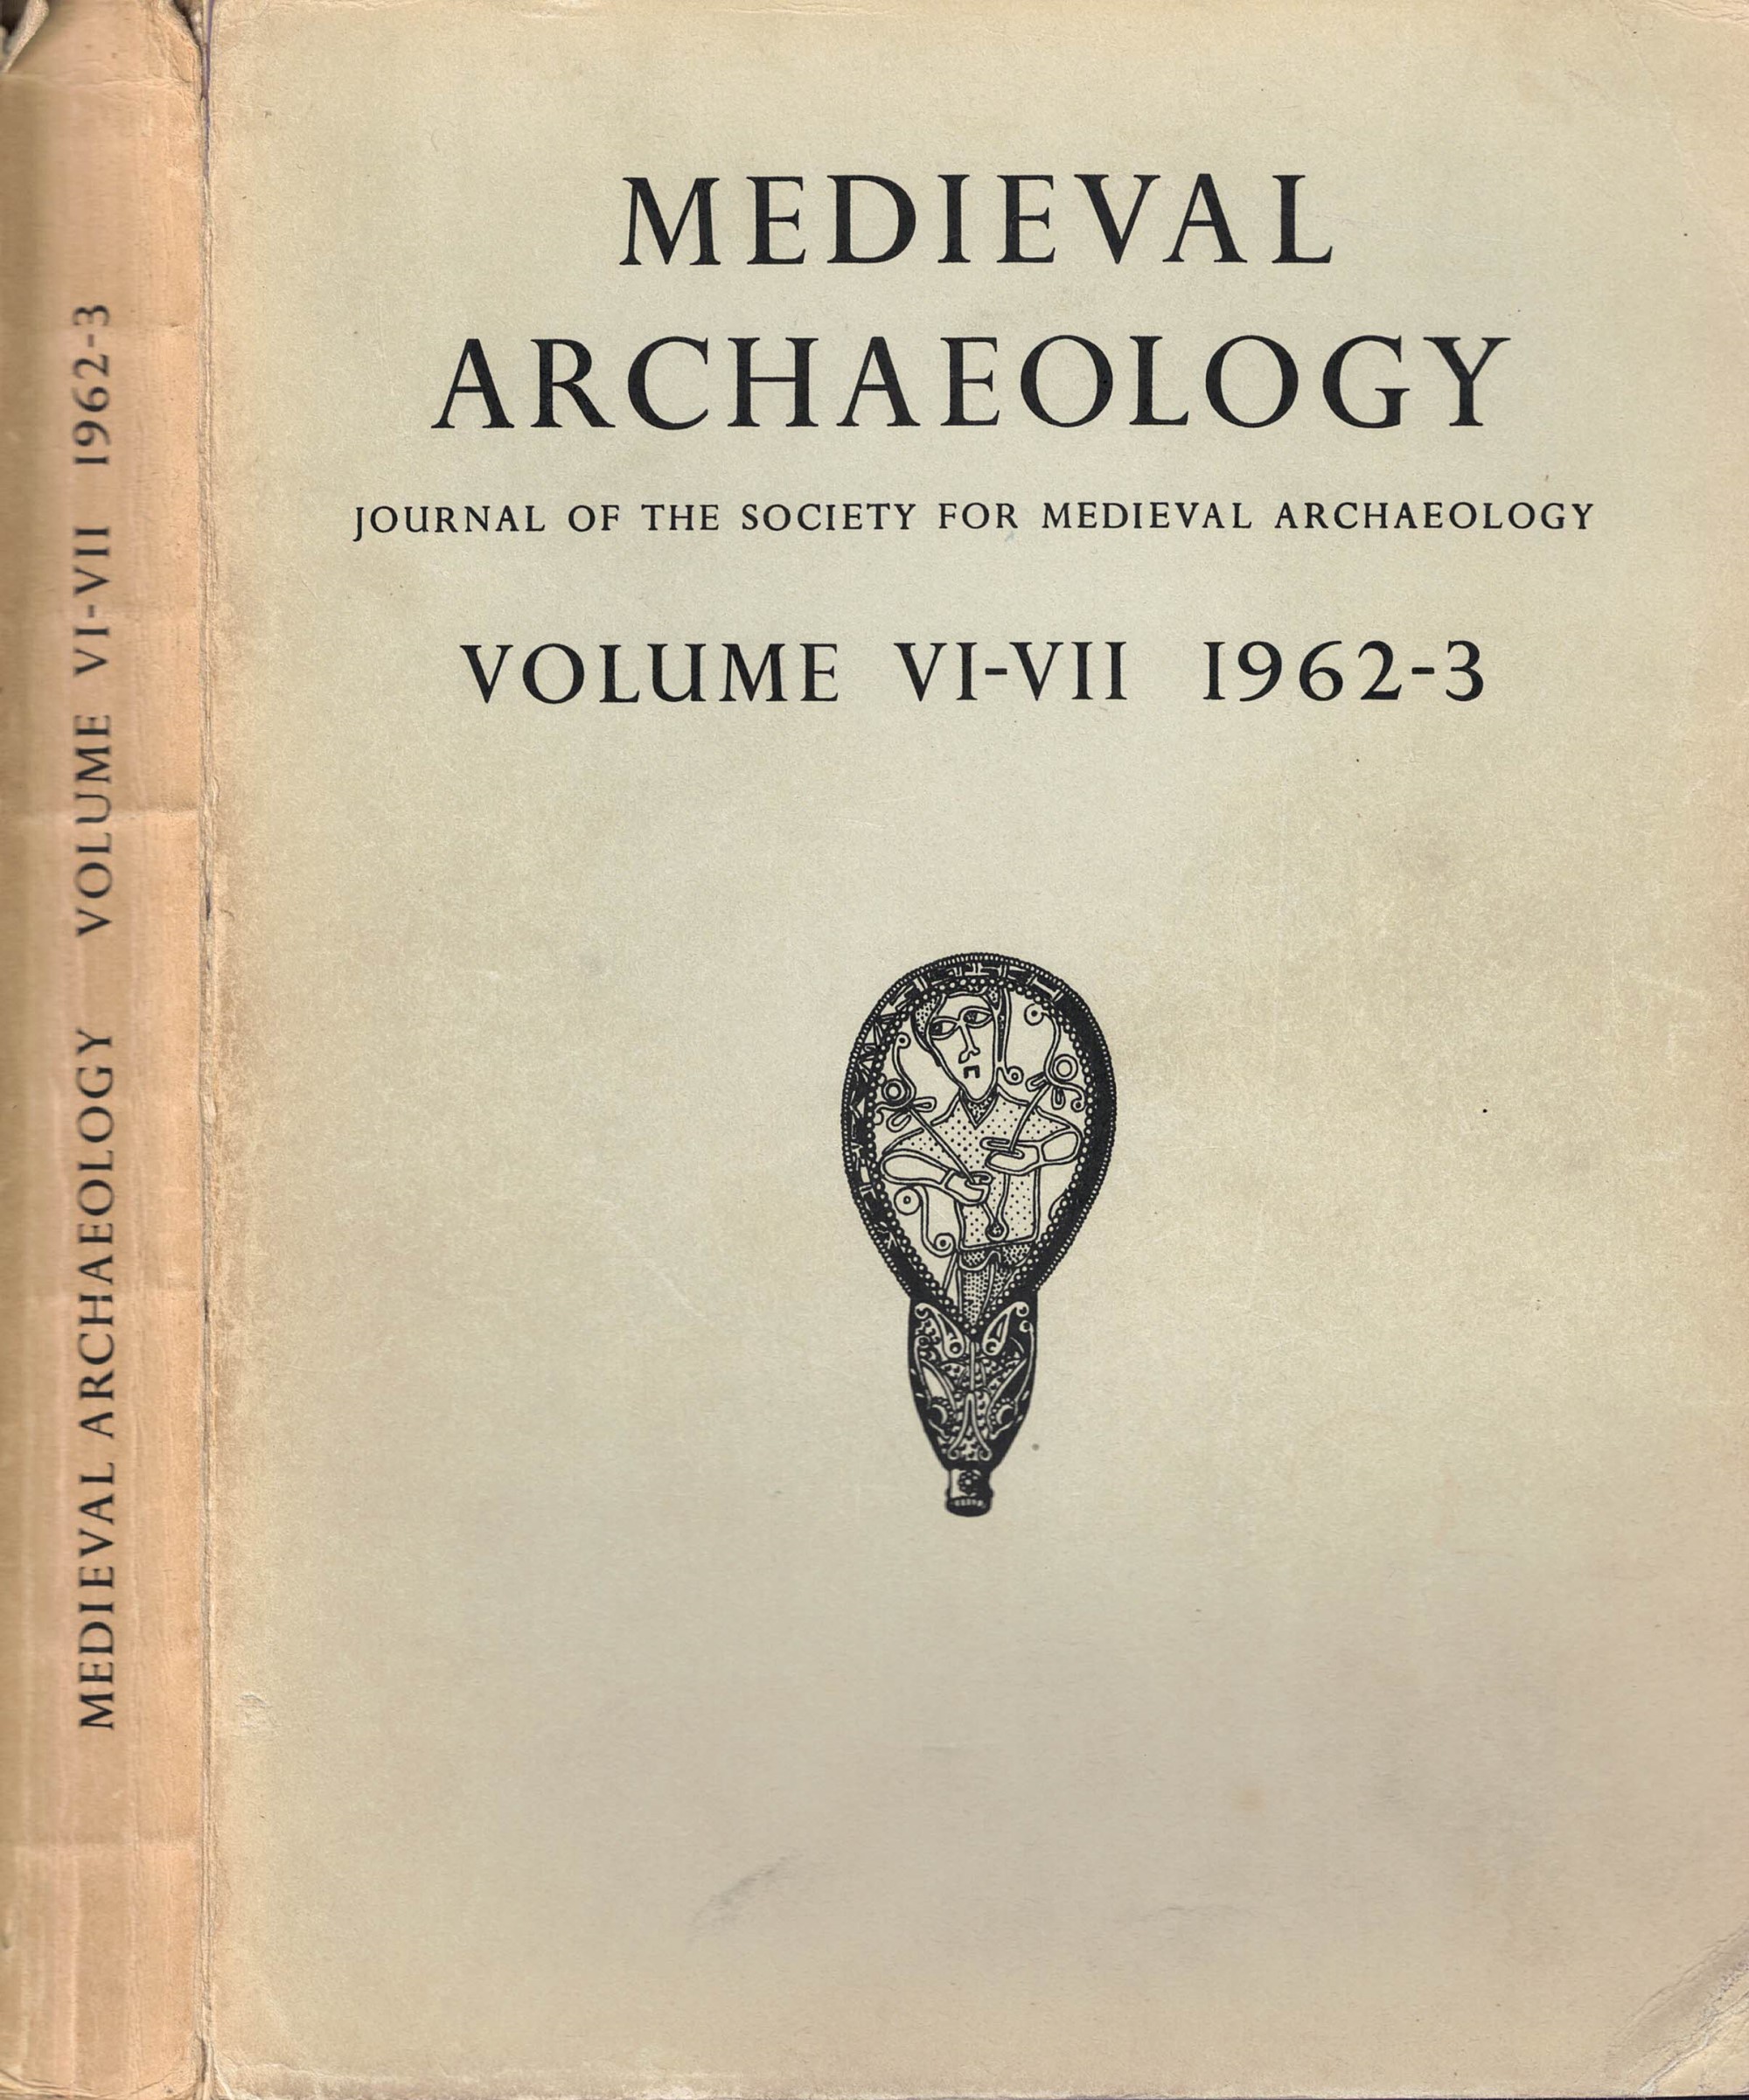 Medieval Archaeology. Journal of the Society for Medieval Archaeology. Vol. VI-VII. 1962-3.